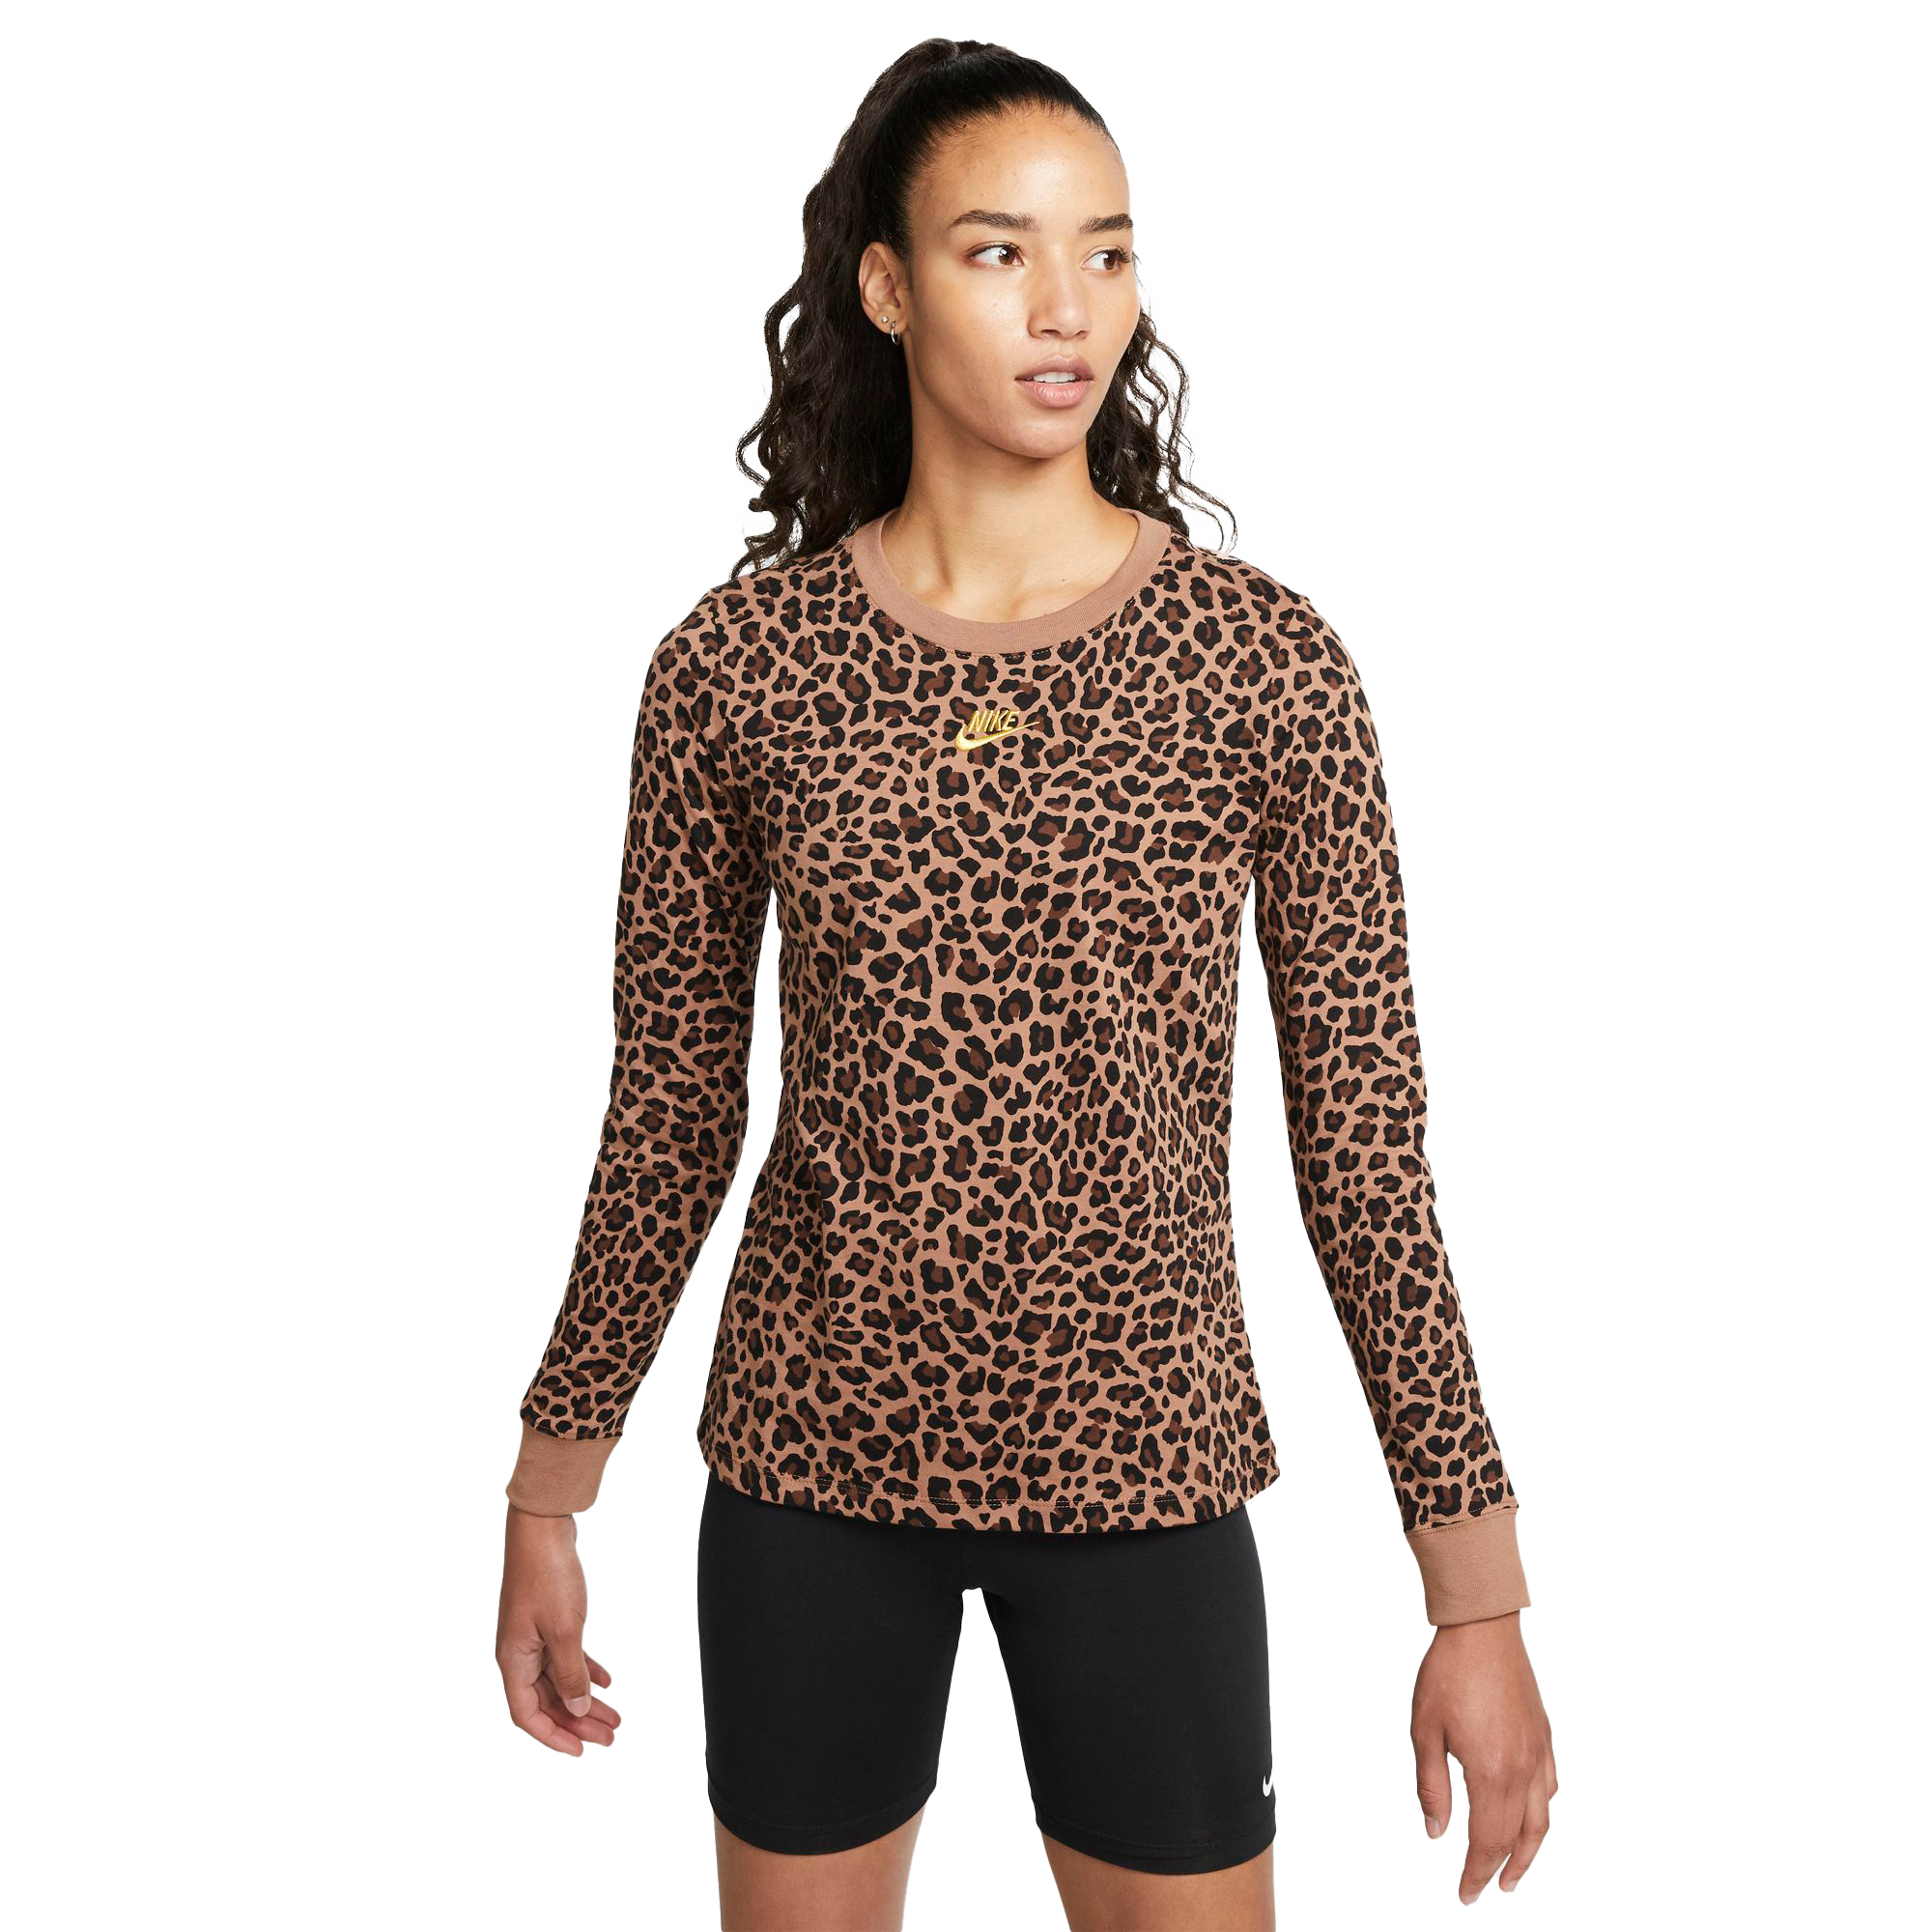 Mikey Store Womens Fashion Round Neck Long-Sleeved Leopard Print with Button Casual Top 